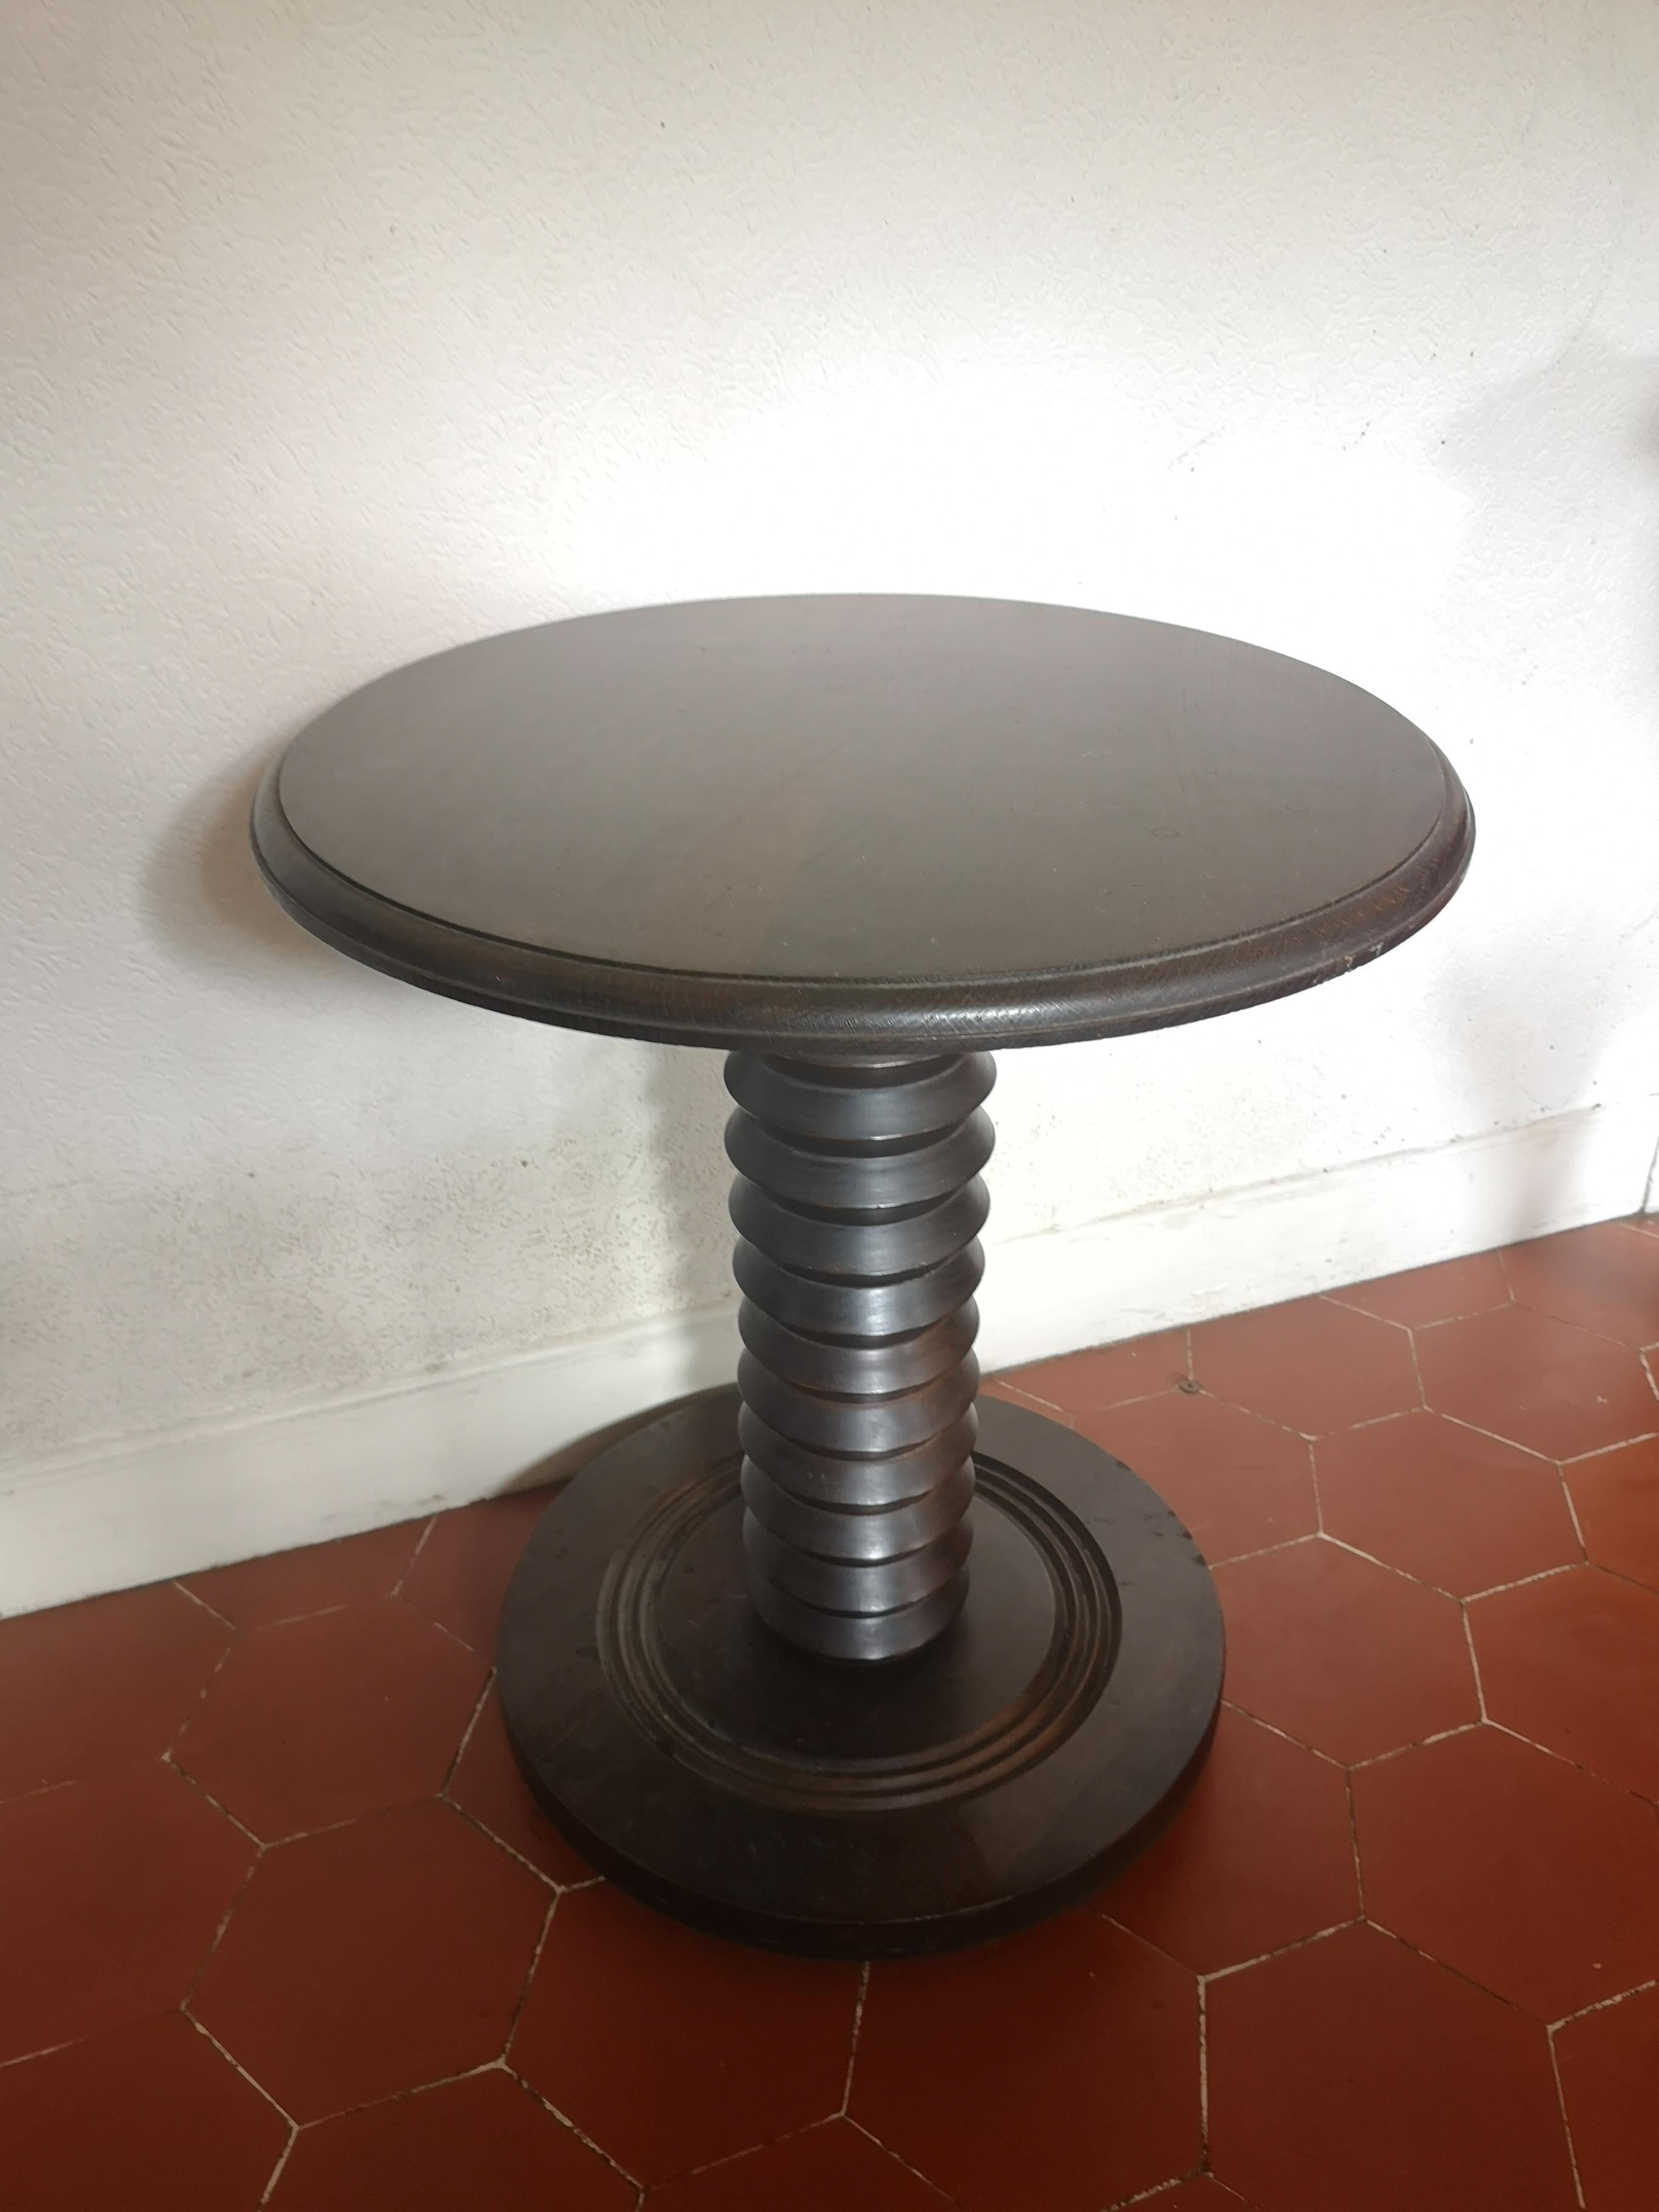 Beautiful carved wooden pedestal table in the style of Charles Dudouyt, 1940s. Circular top with carved wooden rod and circular base. nice dark patina

A favorite among Art Deco furniture collectors and enthusiasts, the work of Charles Dudouyt is